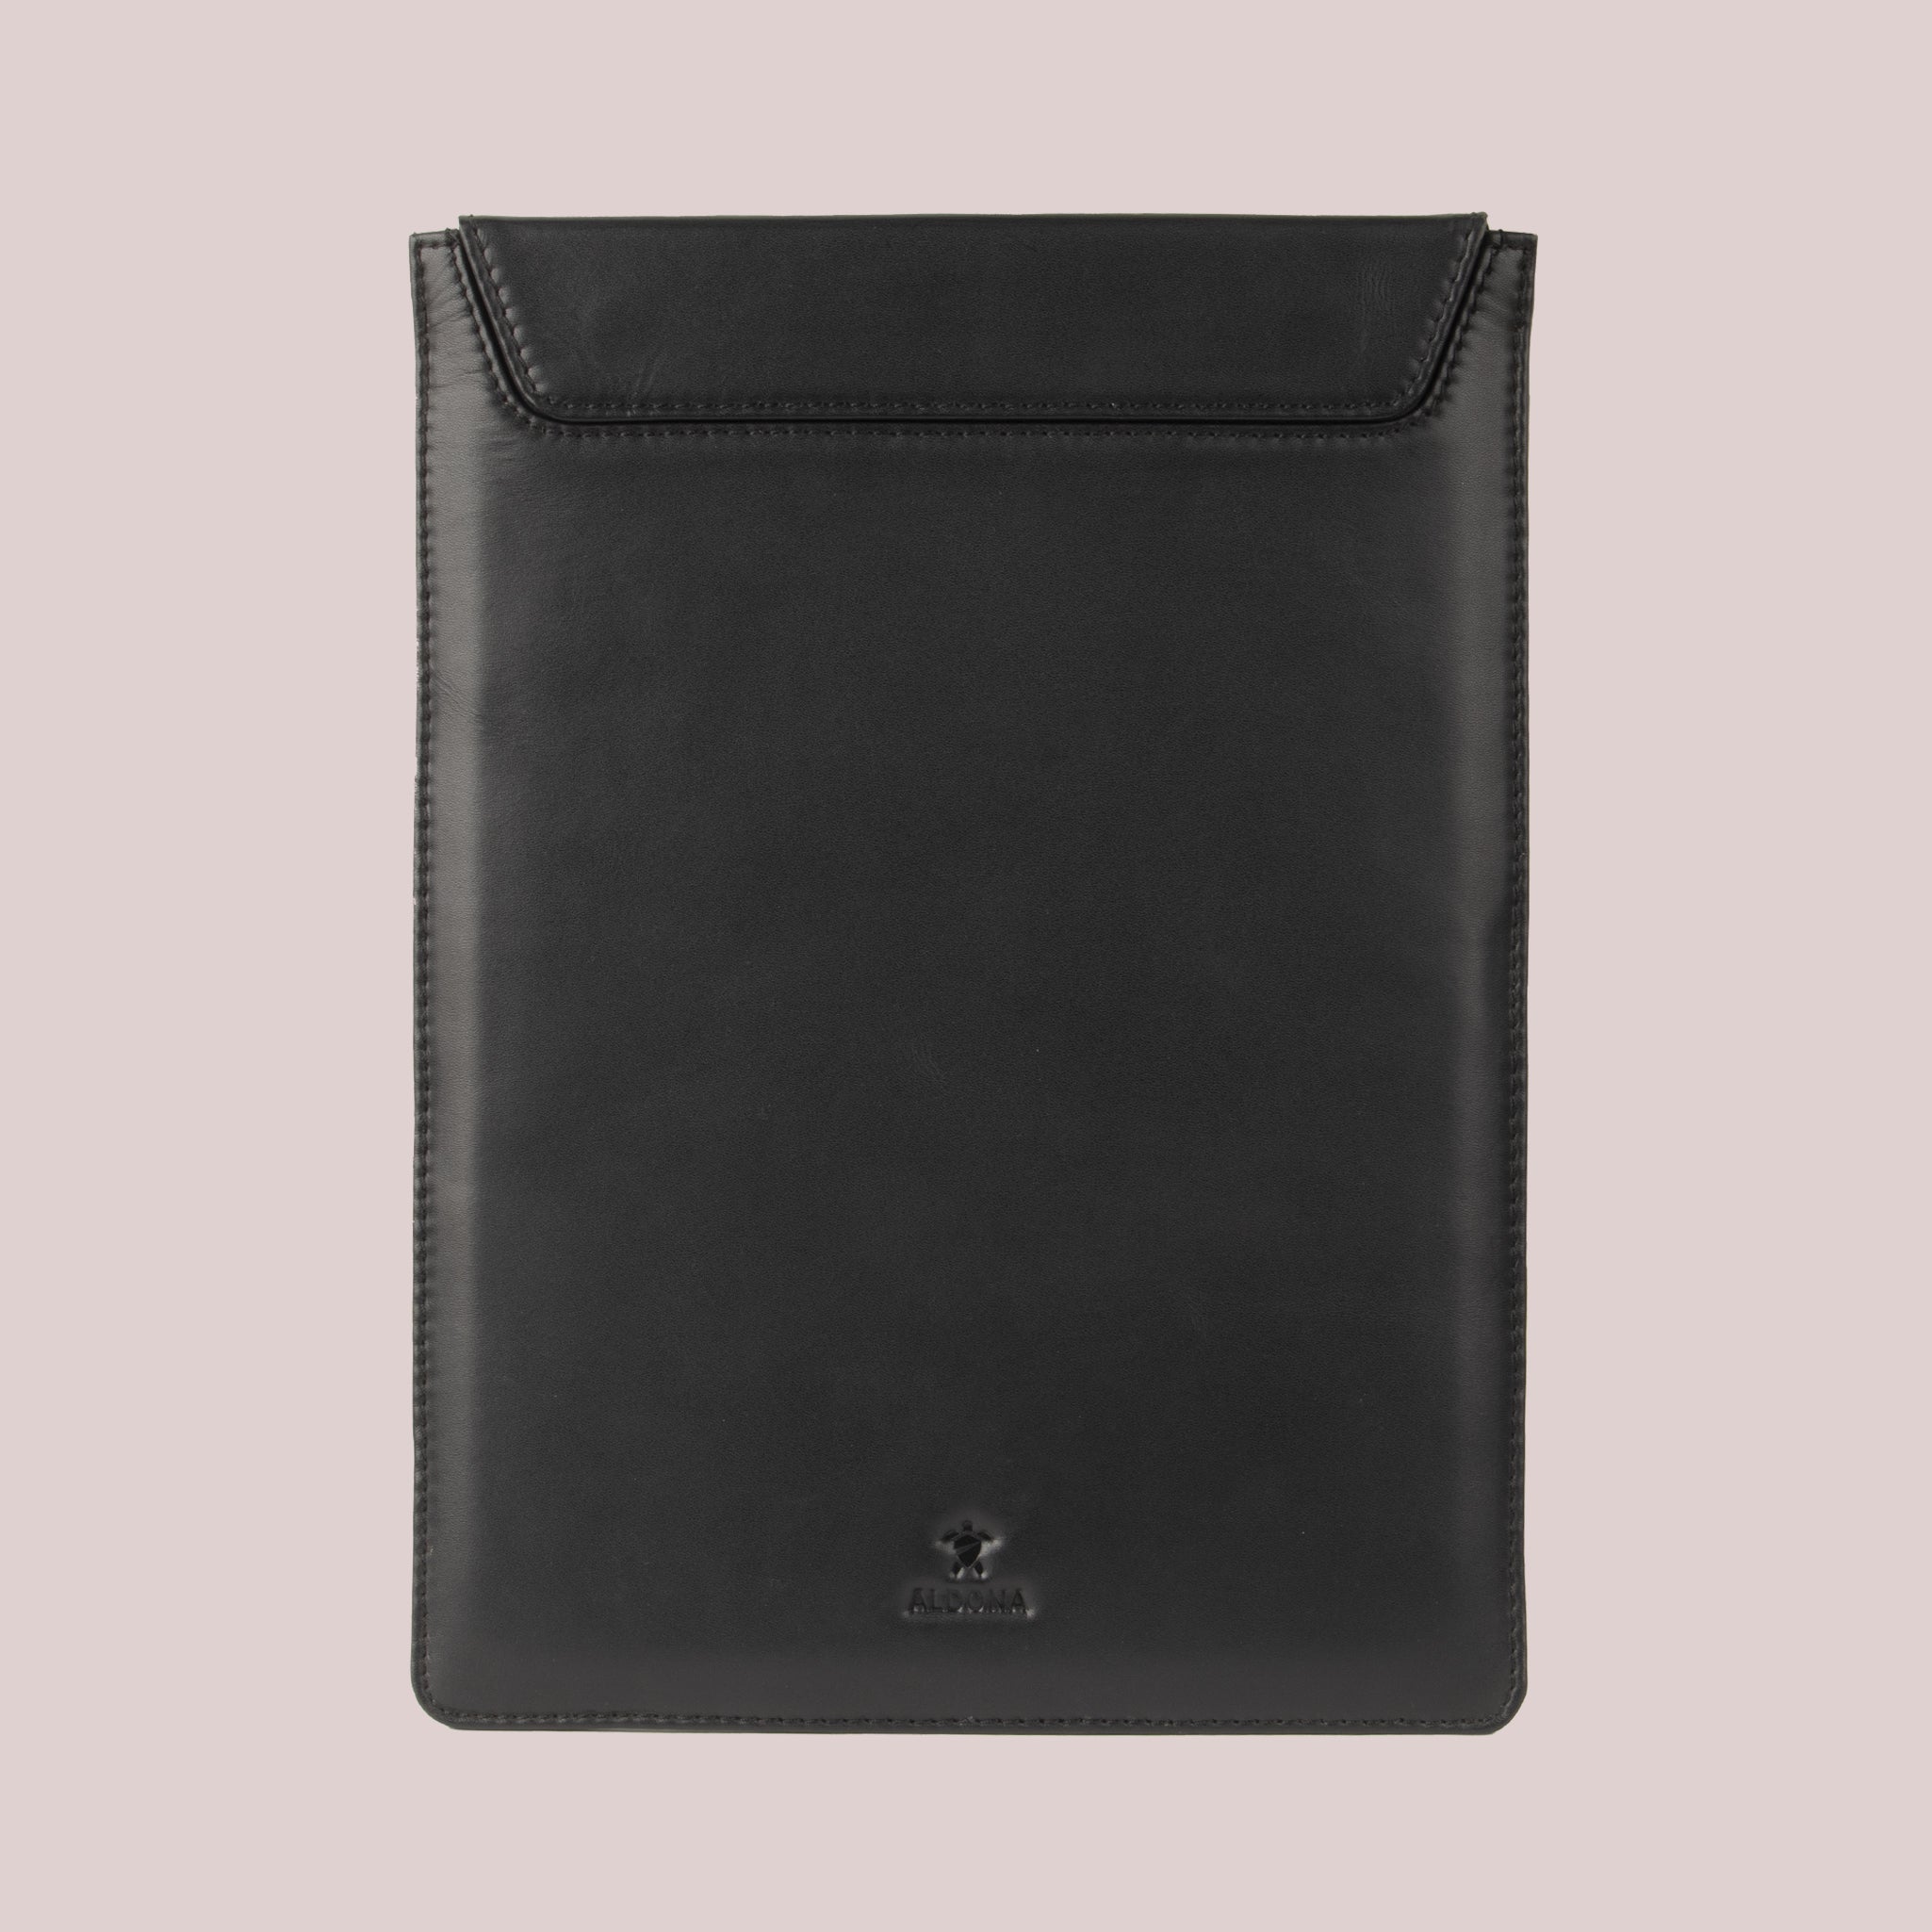 Buy black leather sleeve for Macbook laptops, with a flap